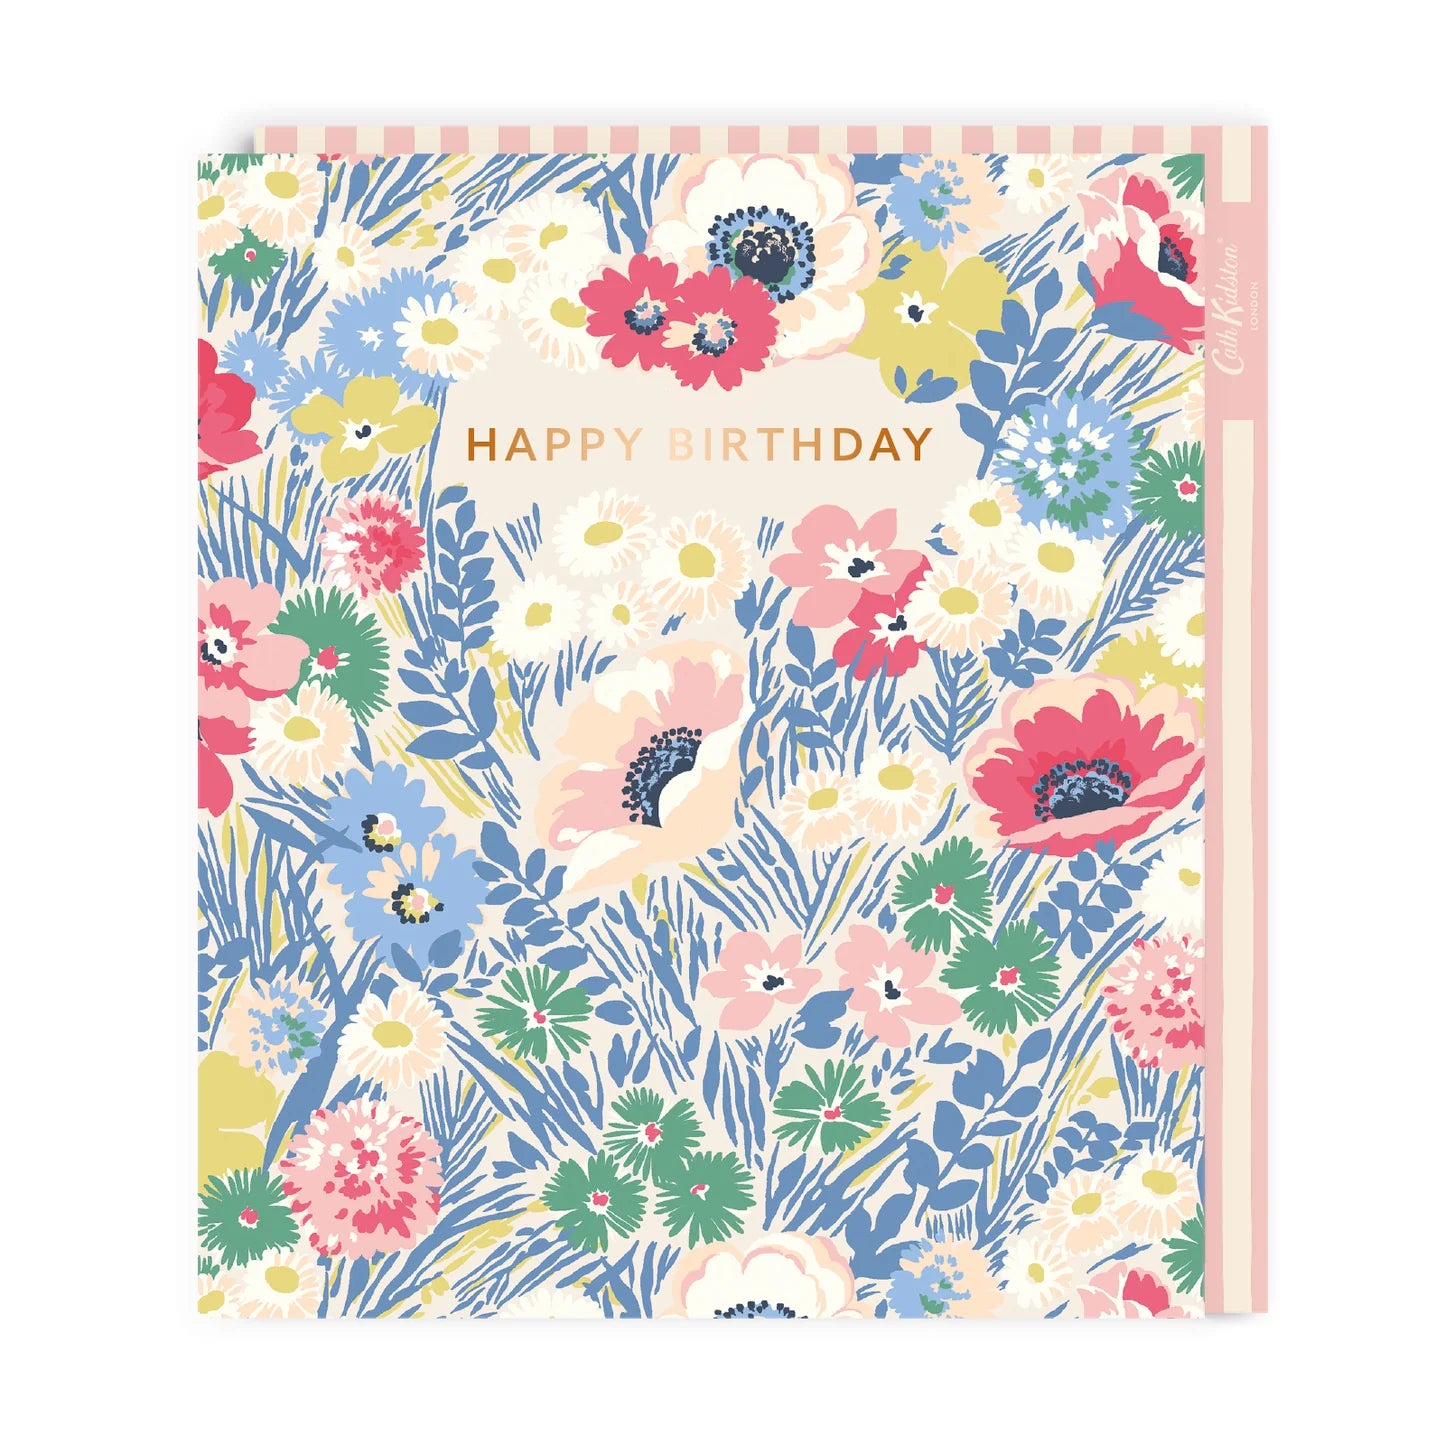 Large Meadow Floral Birthday Card - The Bristol Artisan Handmade Sustainable Gifts and Homewares.